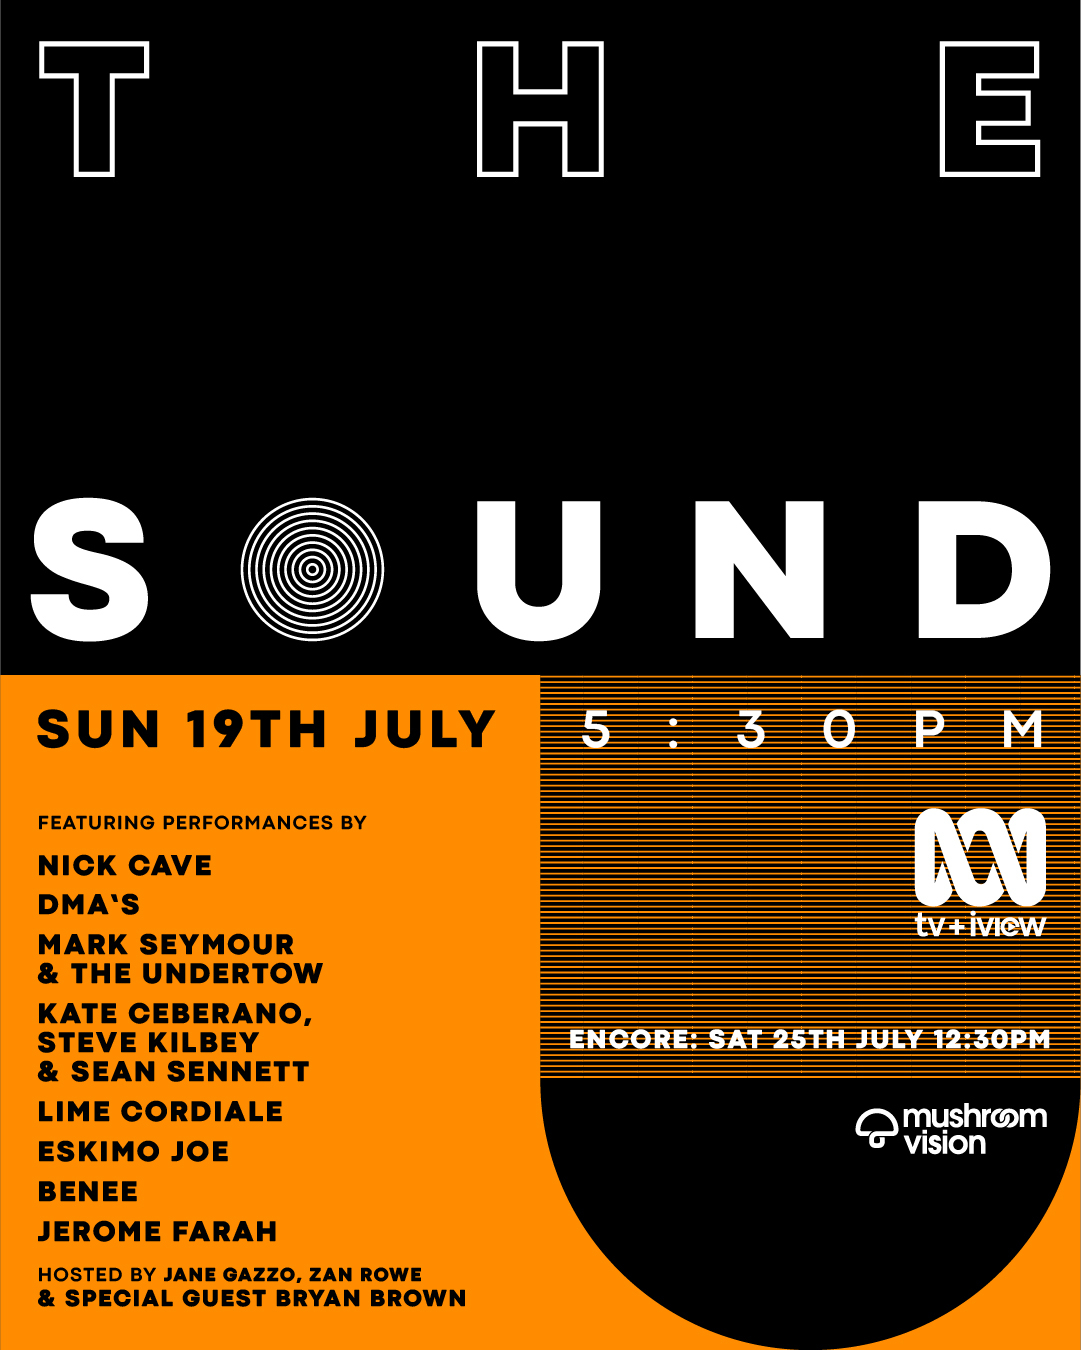 INTRODUCING THE SOUND NEW LIVE MUSIC TELEVISION SERIES  SHOWCASING STRENGTH OF LOCAL TALENT